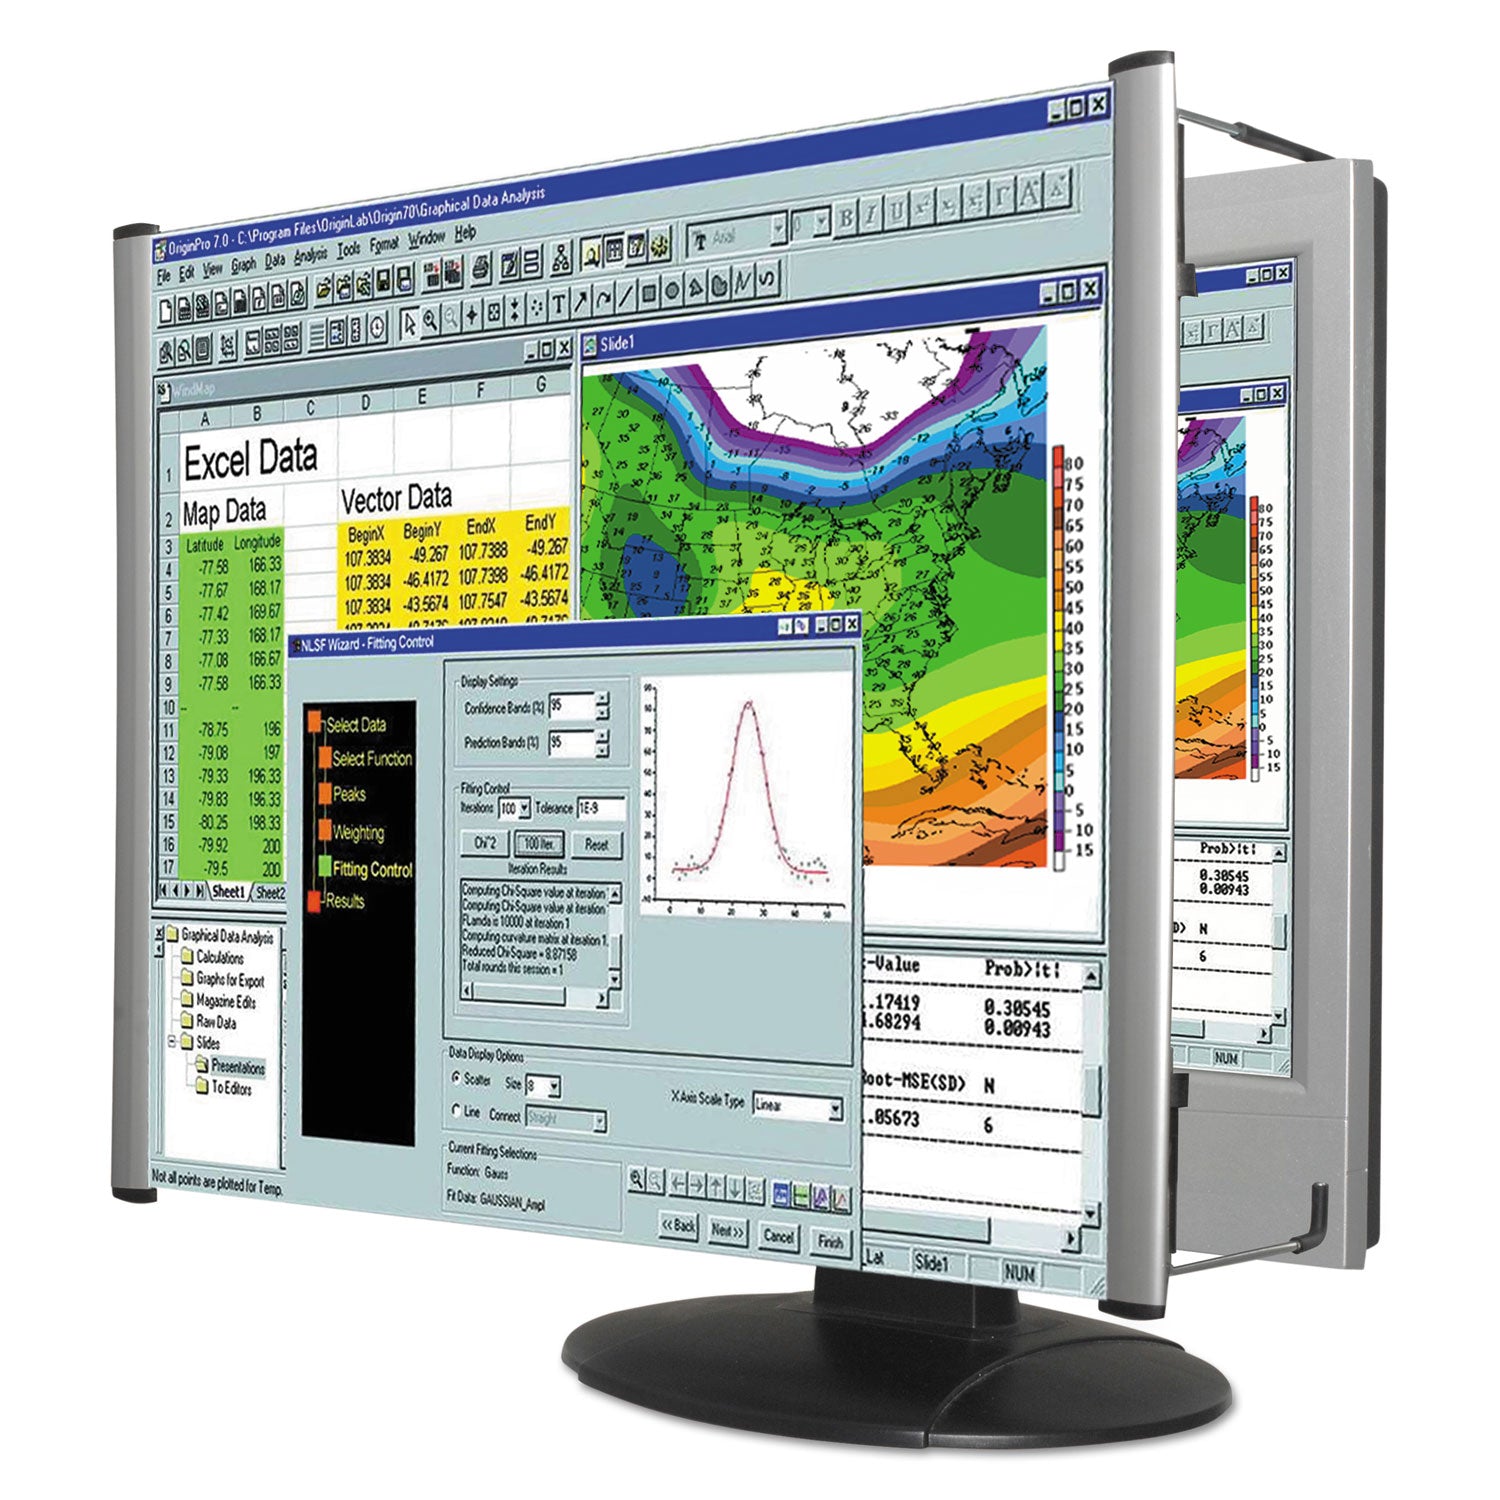 lcd-monitor-magnifier-filter-for-24-widescreen-flat-panel-monitor-169-1610-aspect-ratio_ktkmag24wl - 1